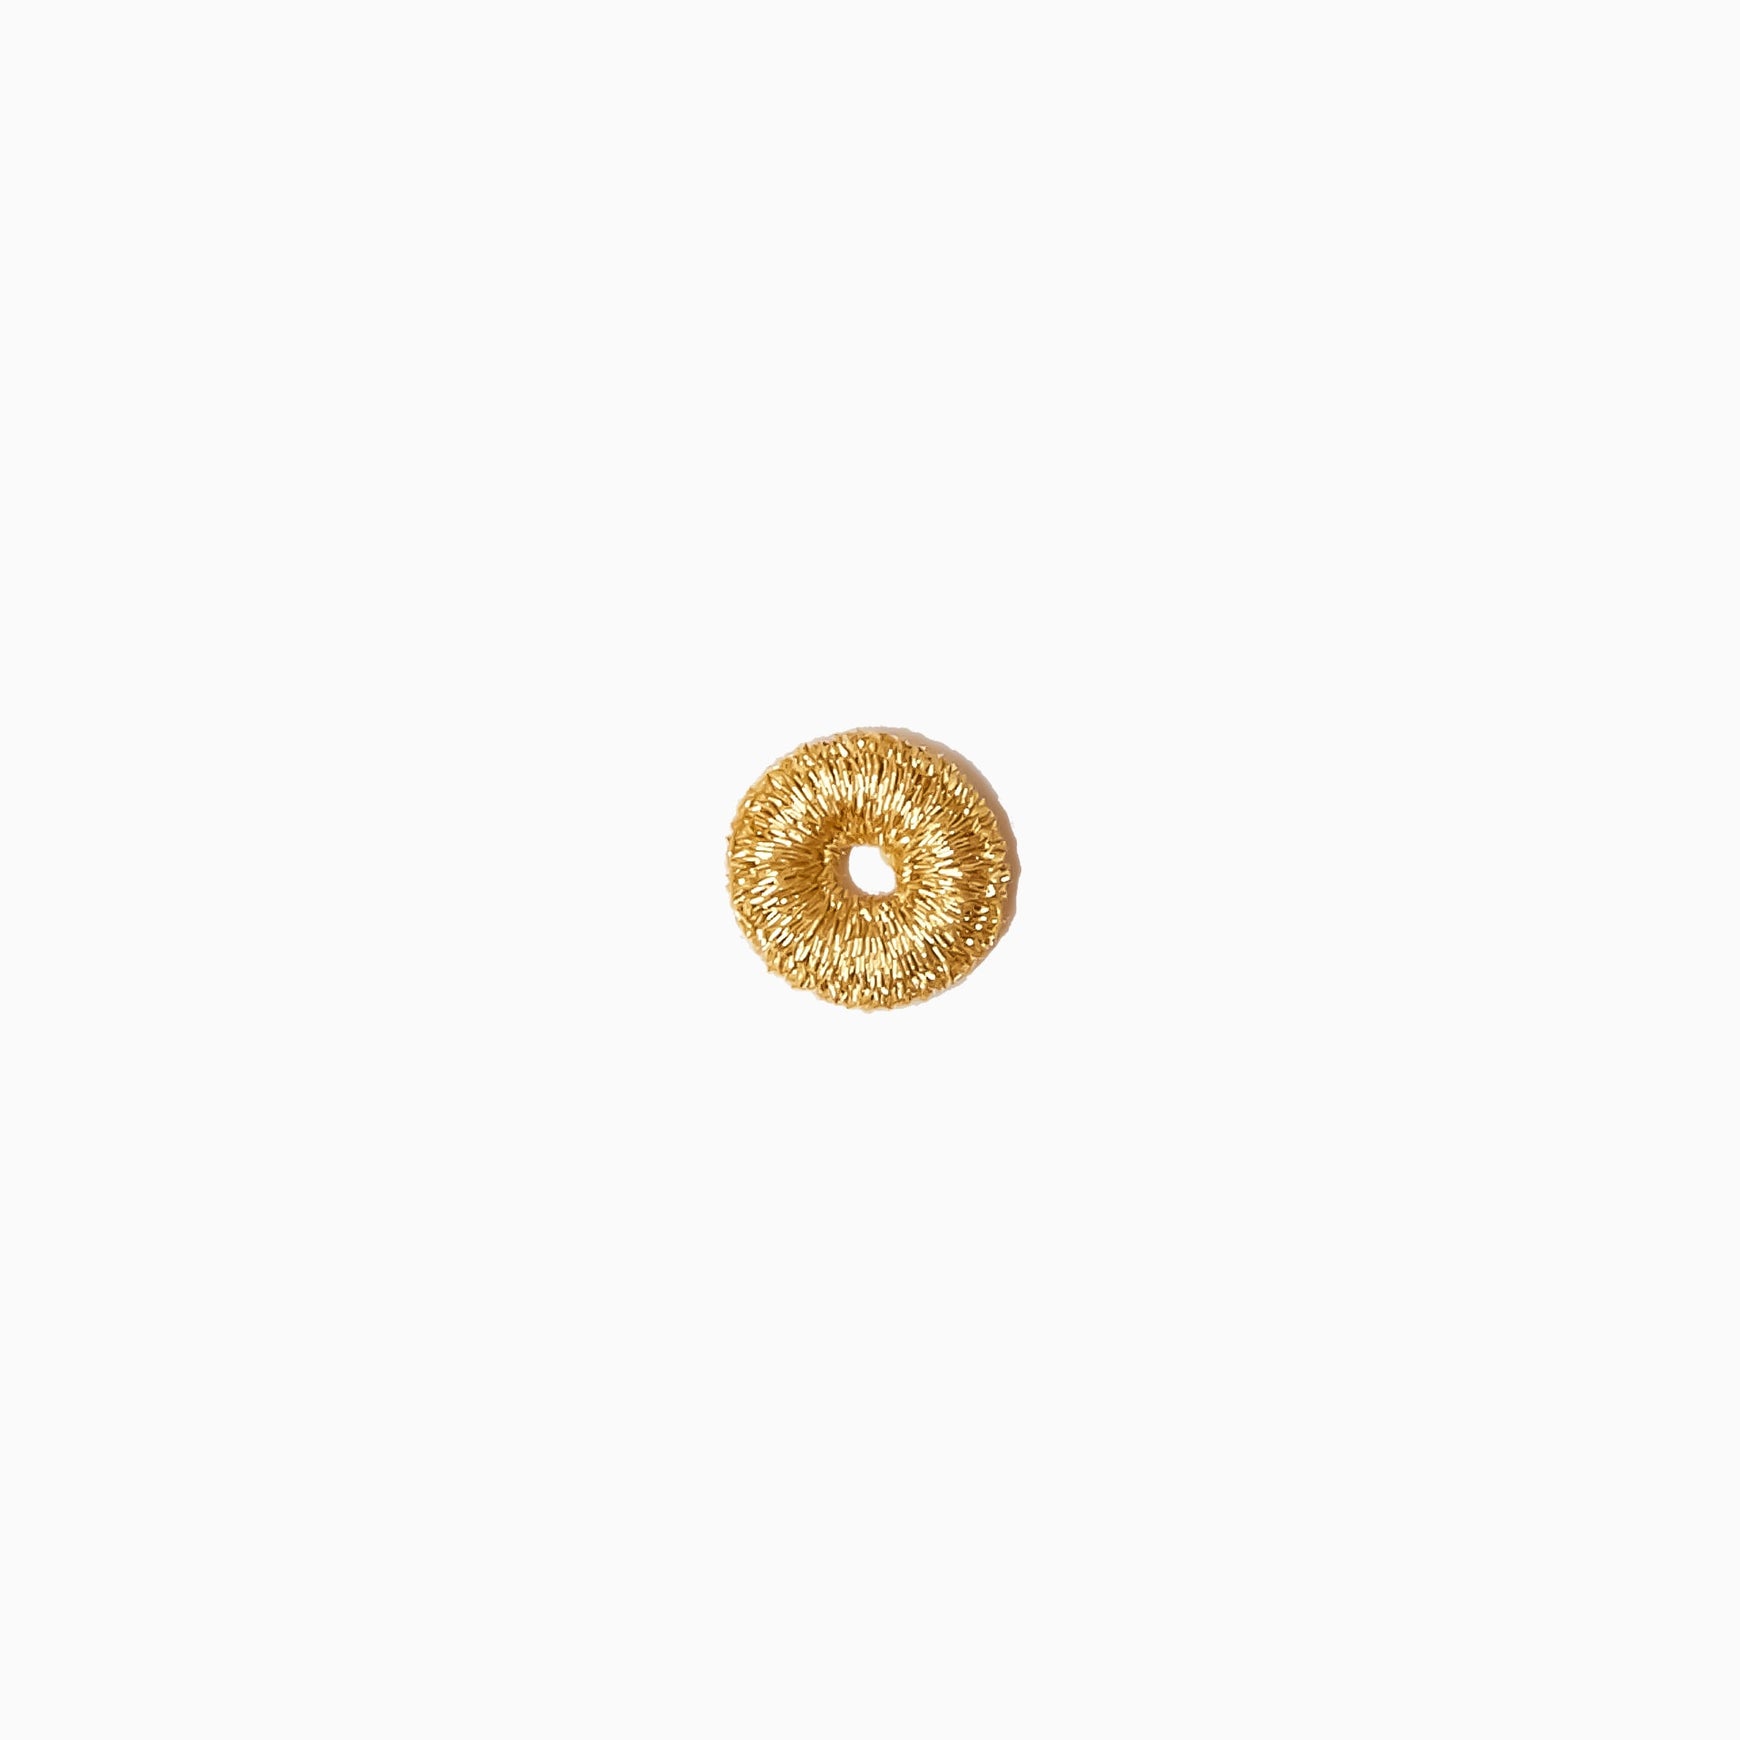 TYPE-1 Circle Washer 10 Pieces (Gold)